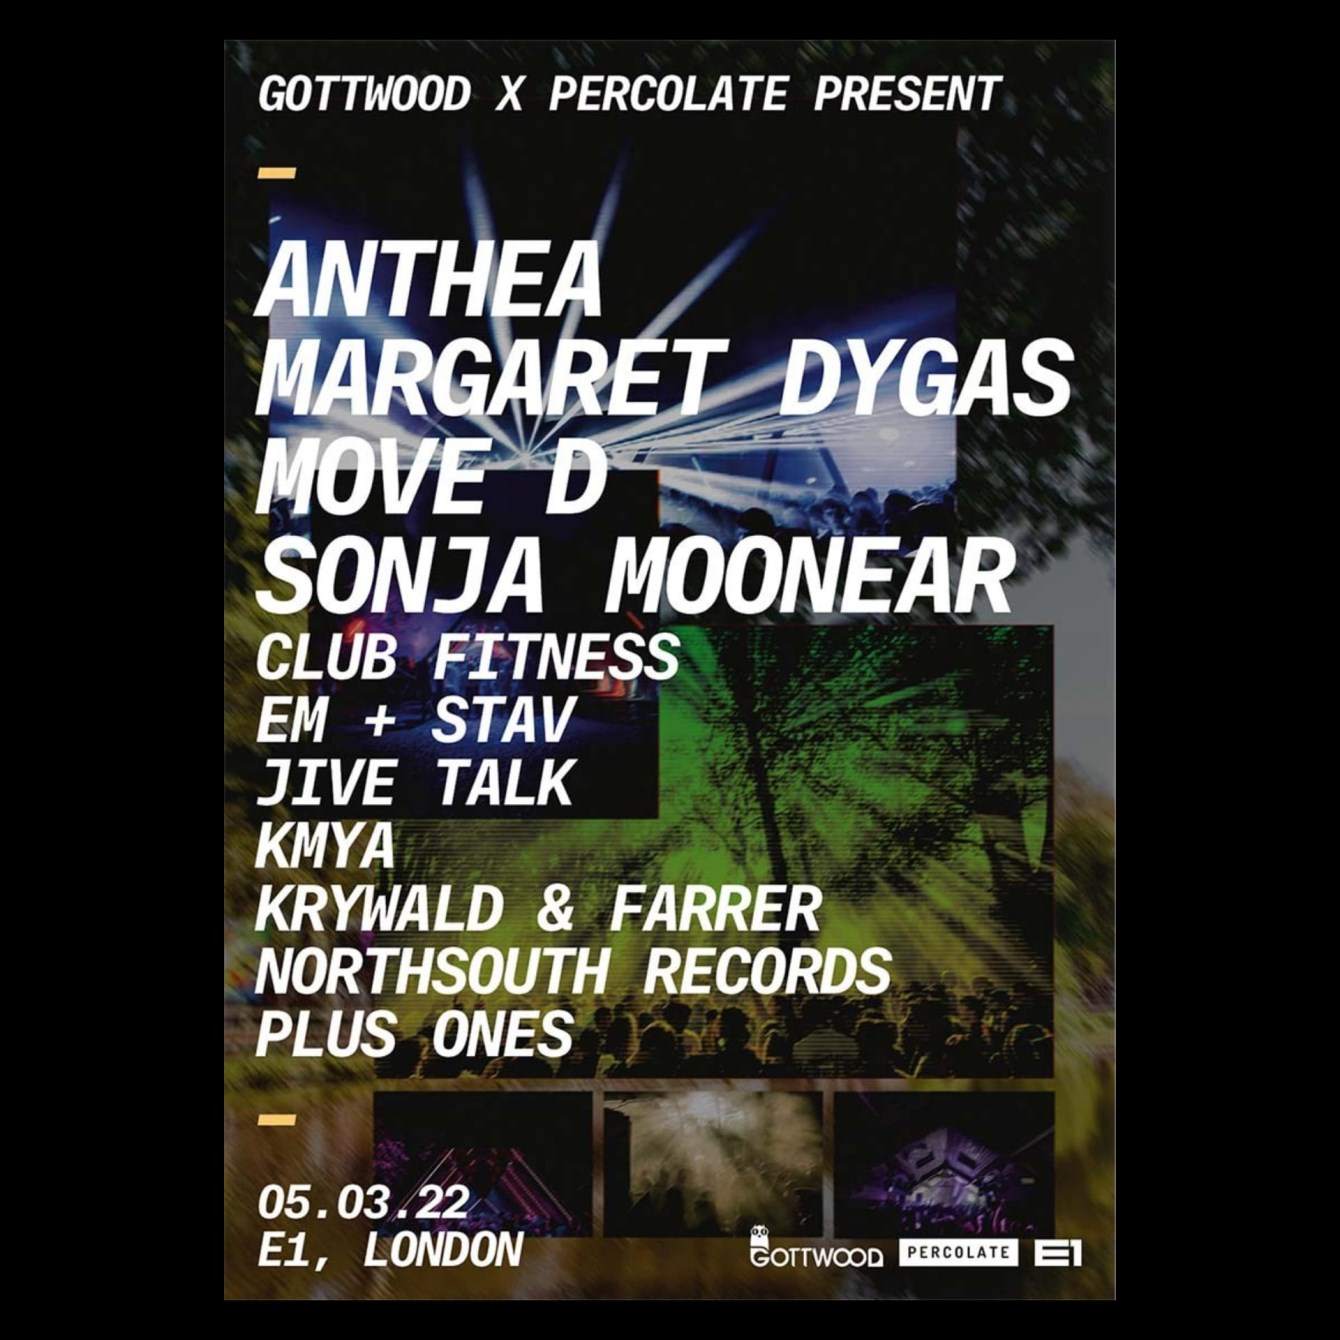 Gottwood x Percolate: Anthea, Margaret Dygas, Move D, Sonja Moonear - Página frontal